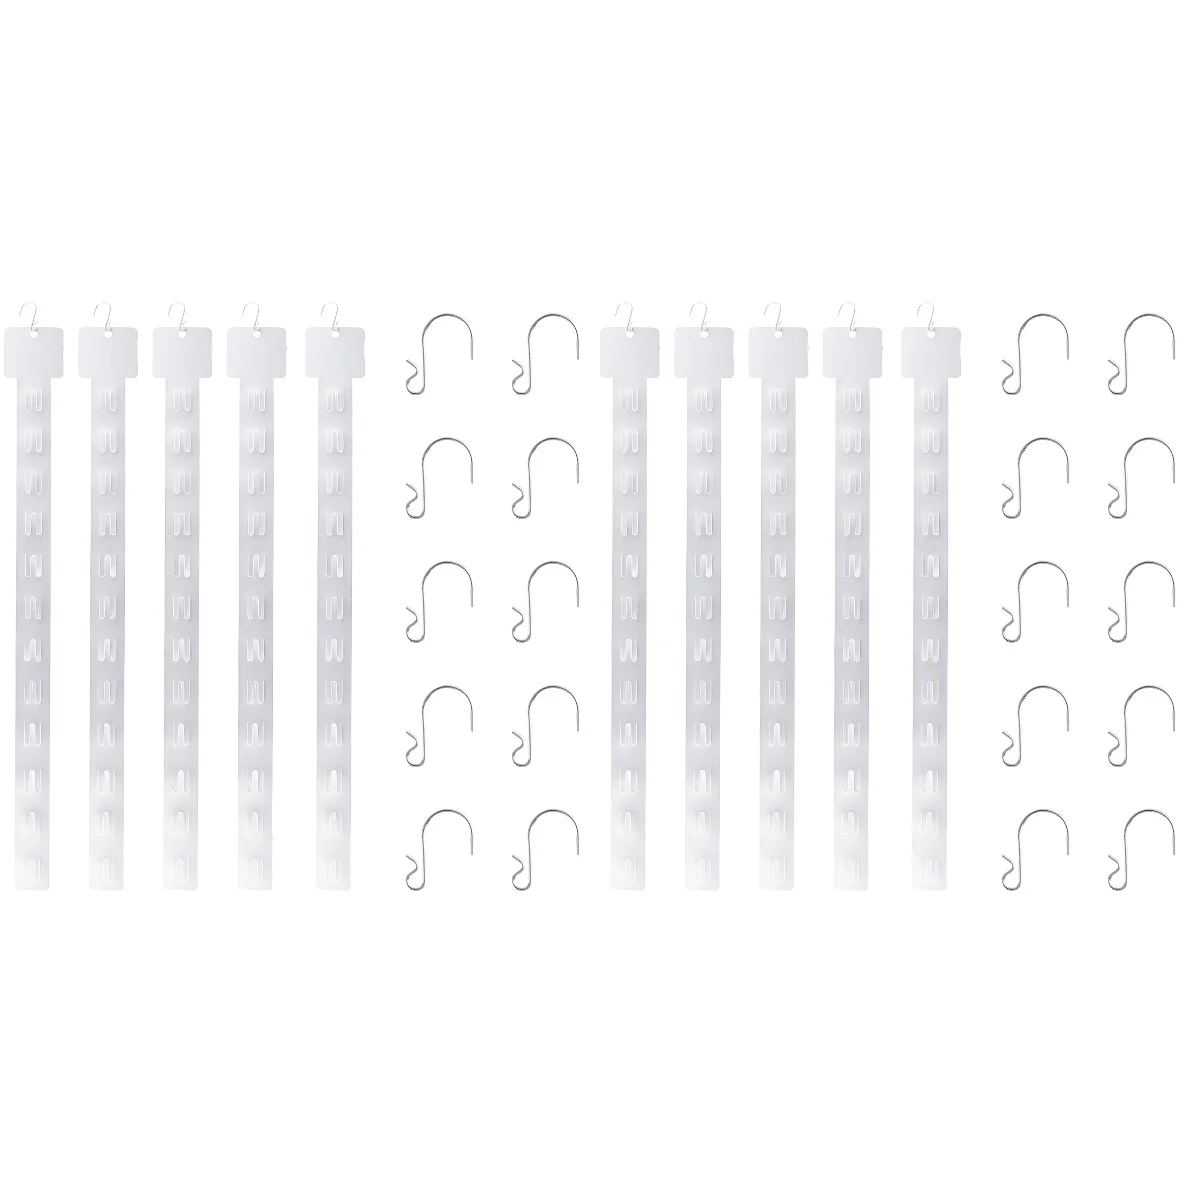 100 pcs Hanging Merchandising Strip Display Plastic Clip Strips for 7 items 